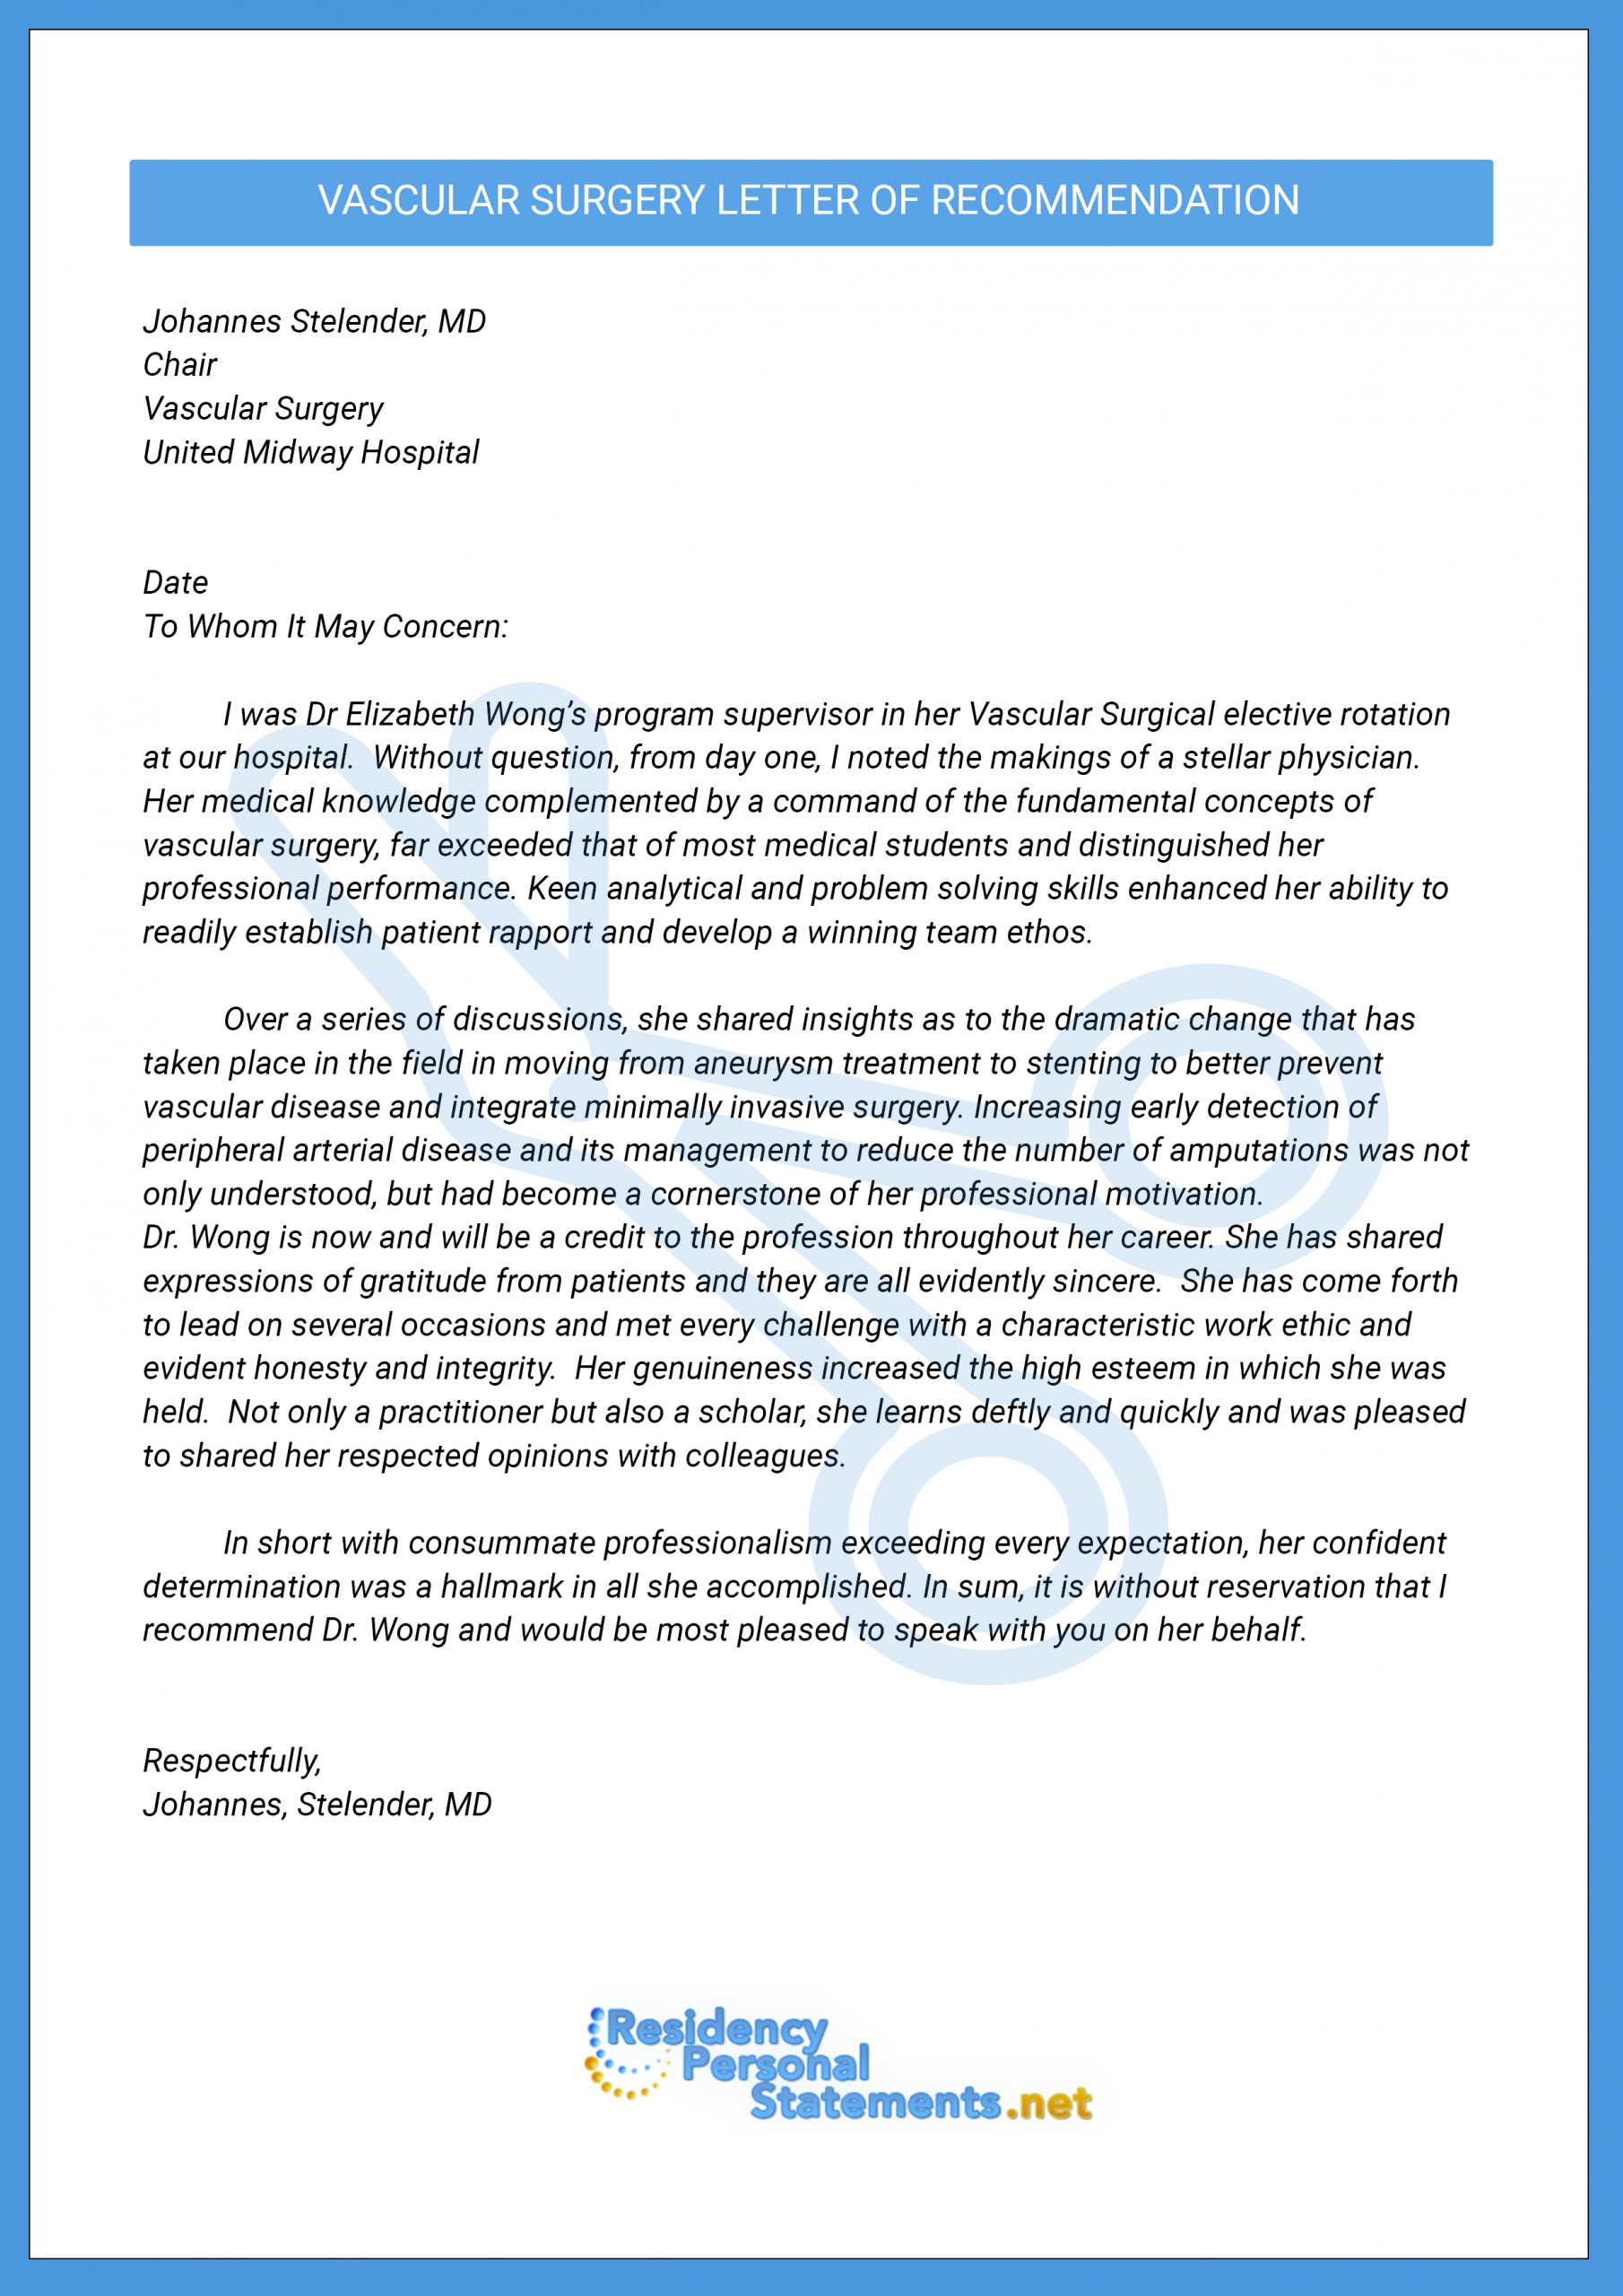 Residency Letter Of Recommendation Writing Help intended for dimensions 2480 X 3508